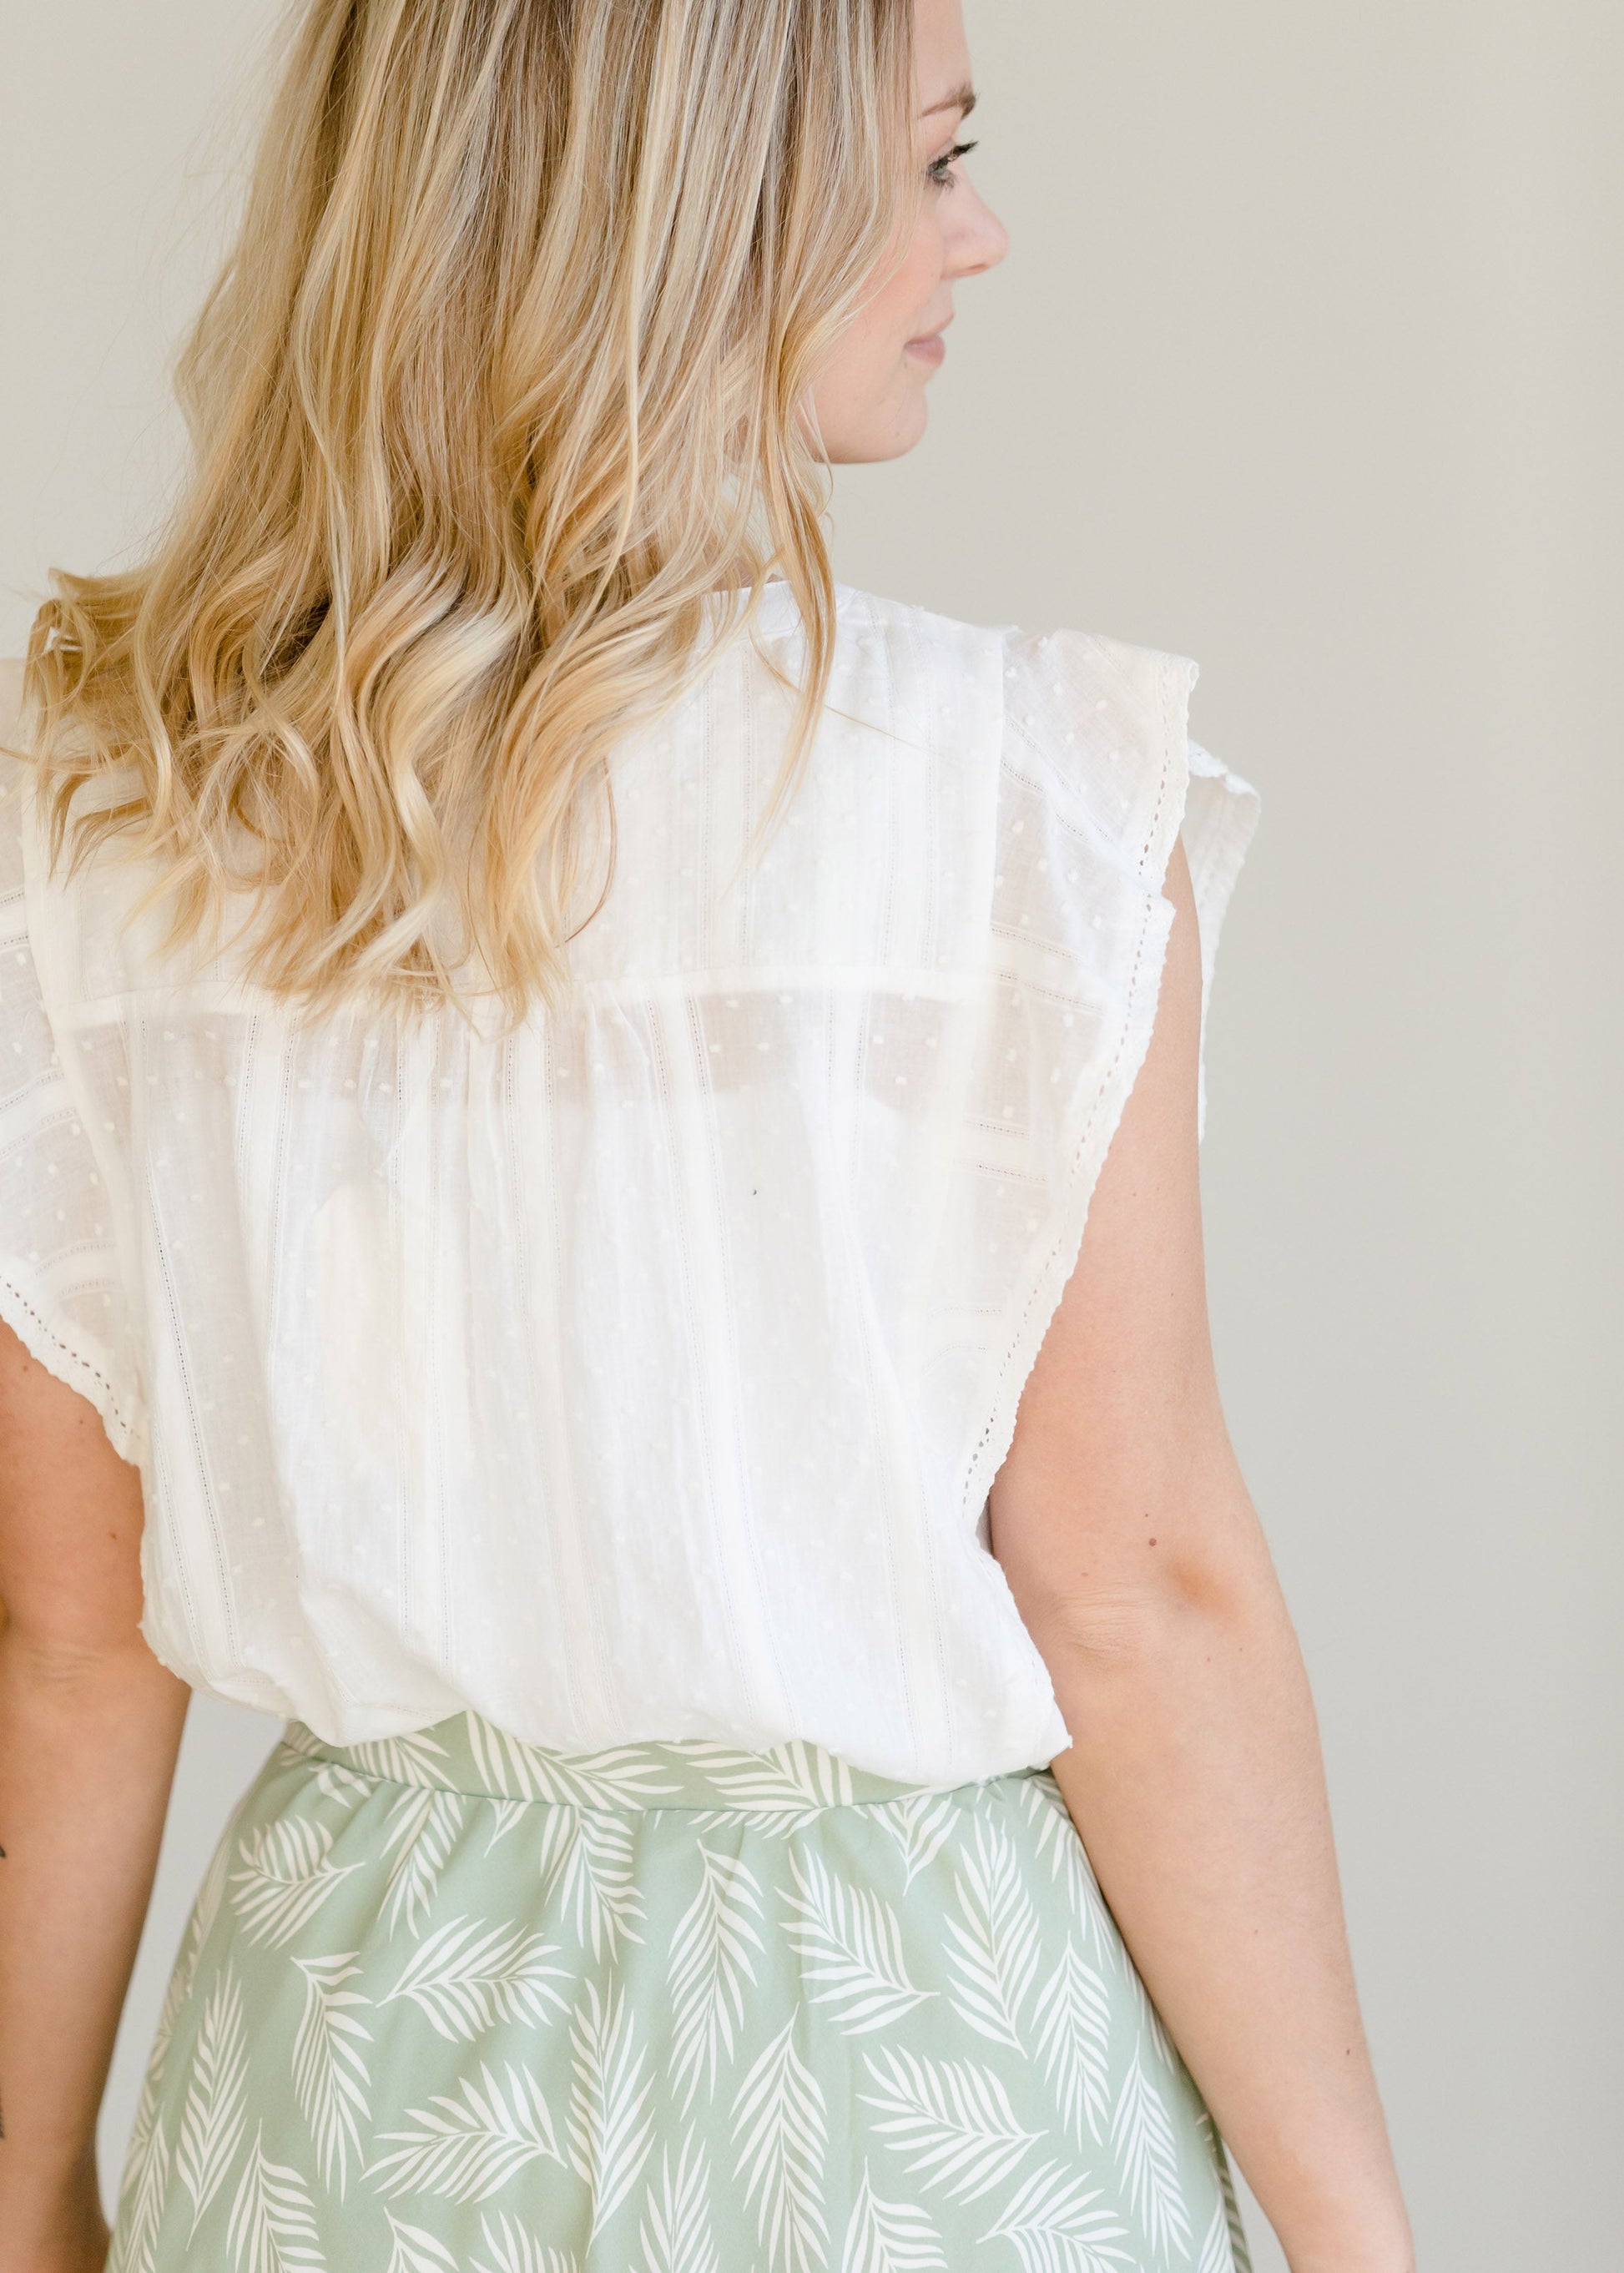 Eyelet Lace Ruffle Sleeve Top - FINAL SALE Tops